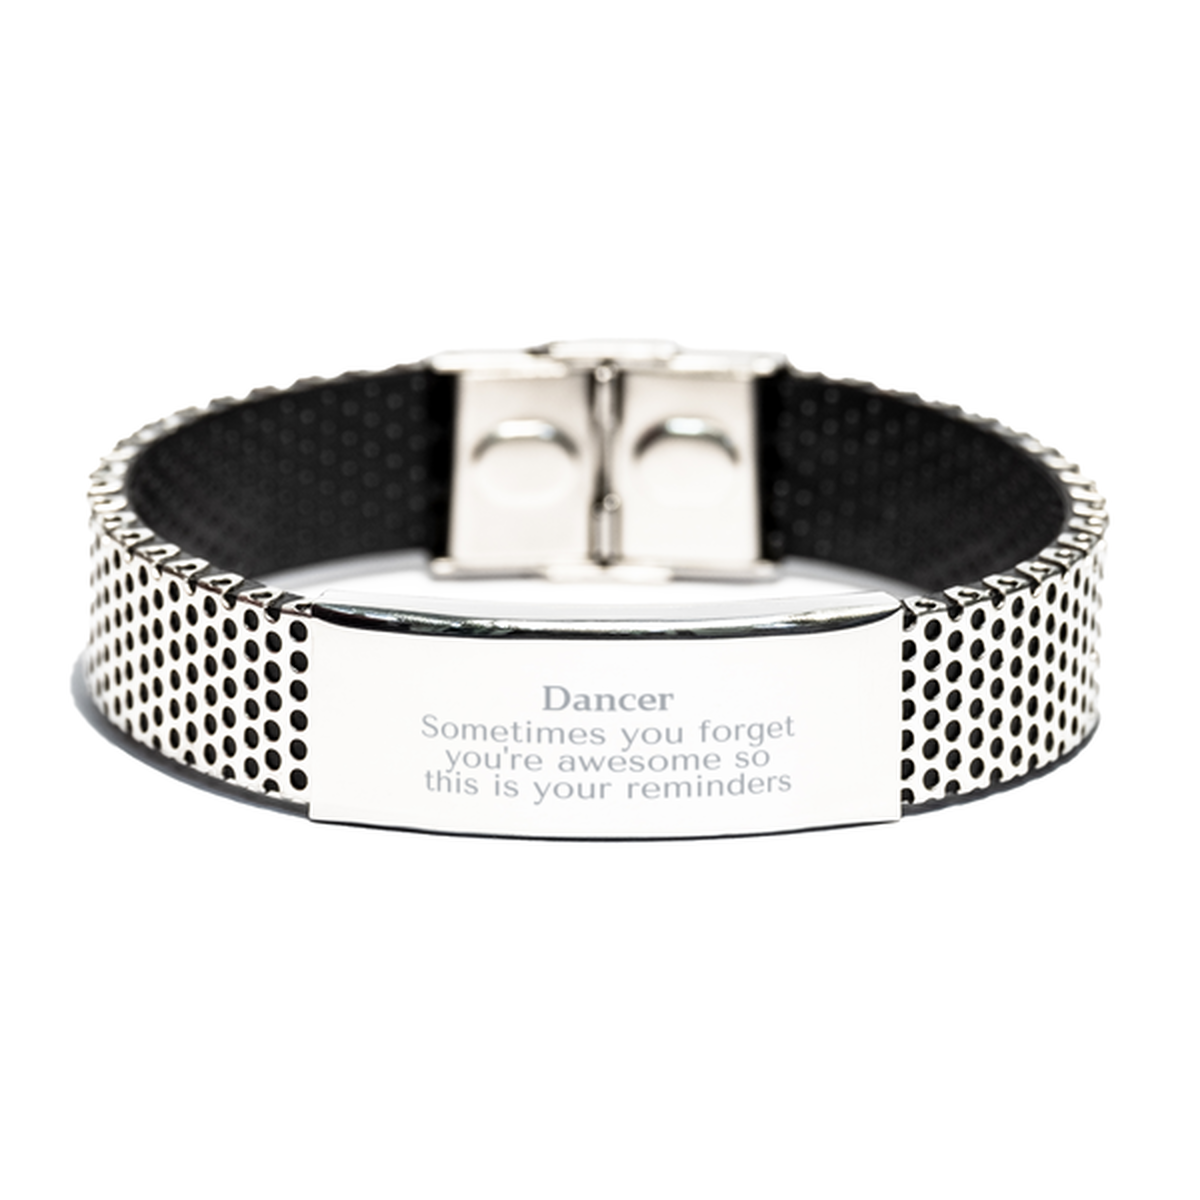 Sentimental Dancer Stainless Steel Bracelet, Dancer Sometimes you forget you're awesome so this is your reminders, Graduation Christmas Birthday Gifts for Dancer, Men, Women, Coworkers